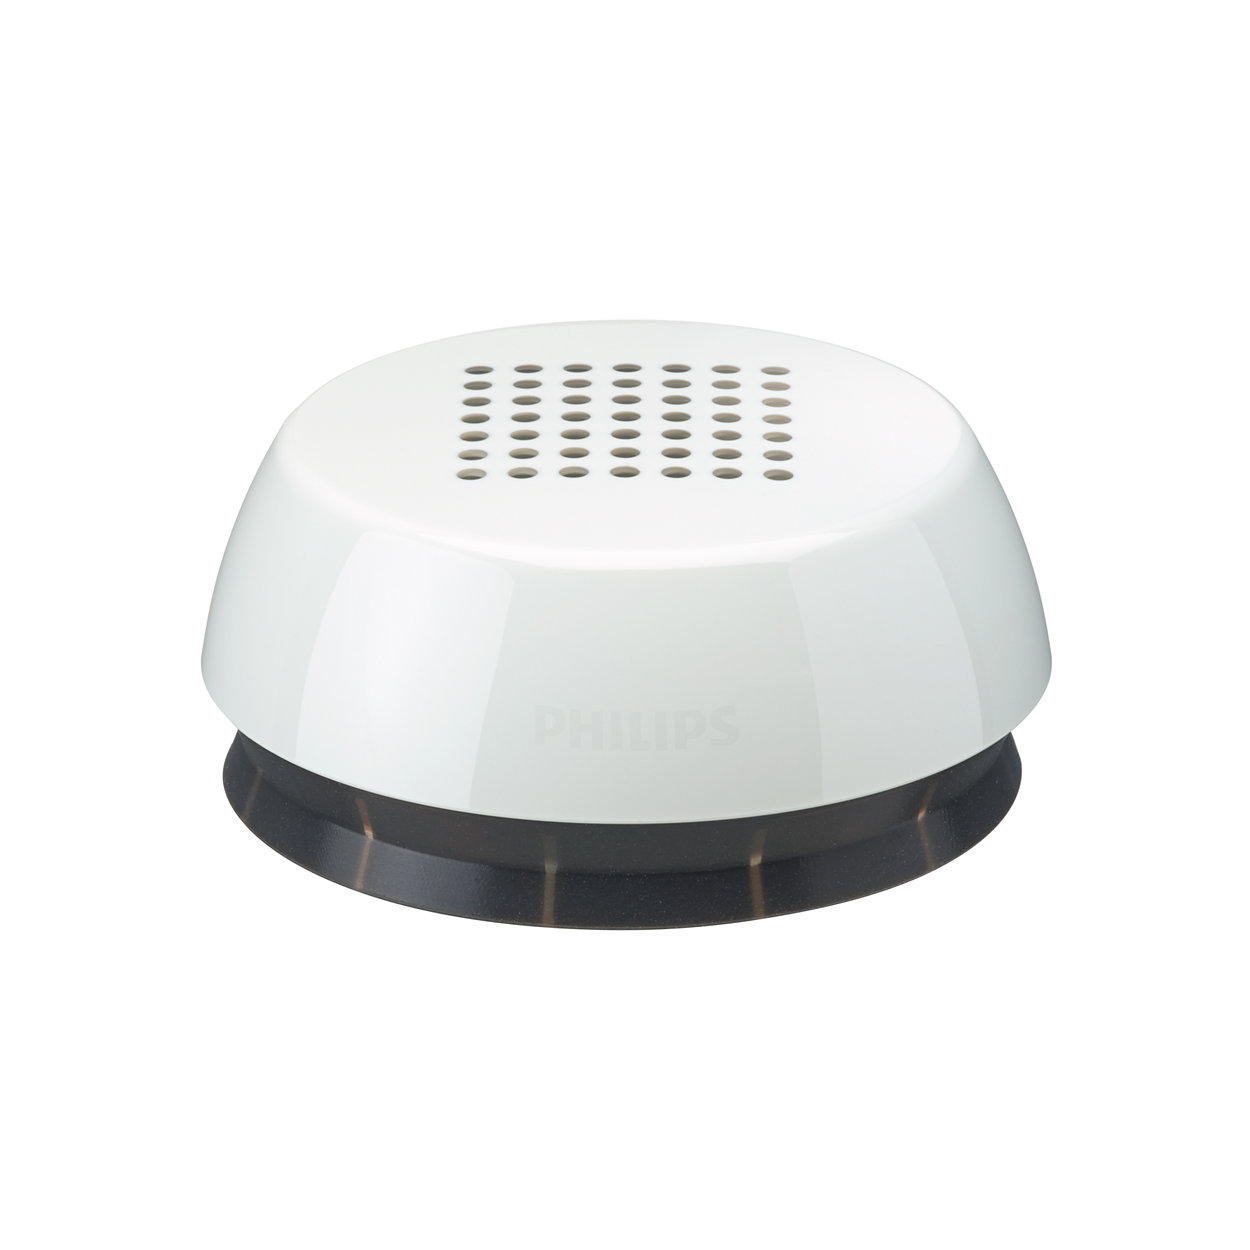 Wireless connectivity for outdoor lighting control. A plug-and-play device that transforms any streetlight into an individually controllable, remotely managed luminaire.